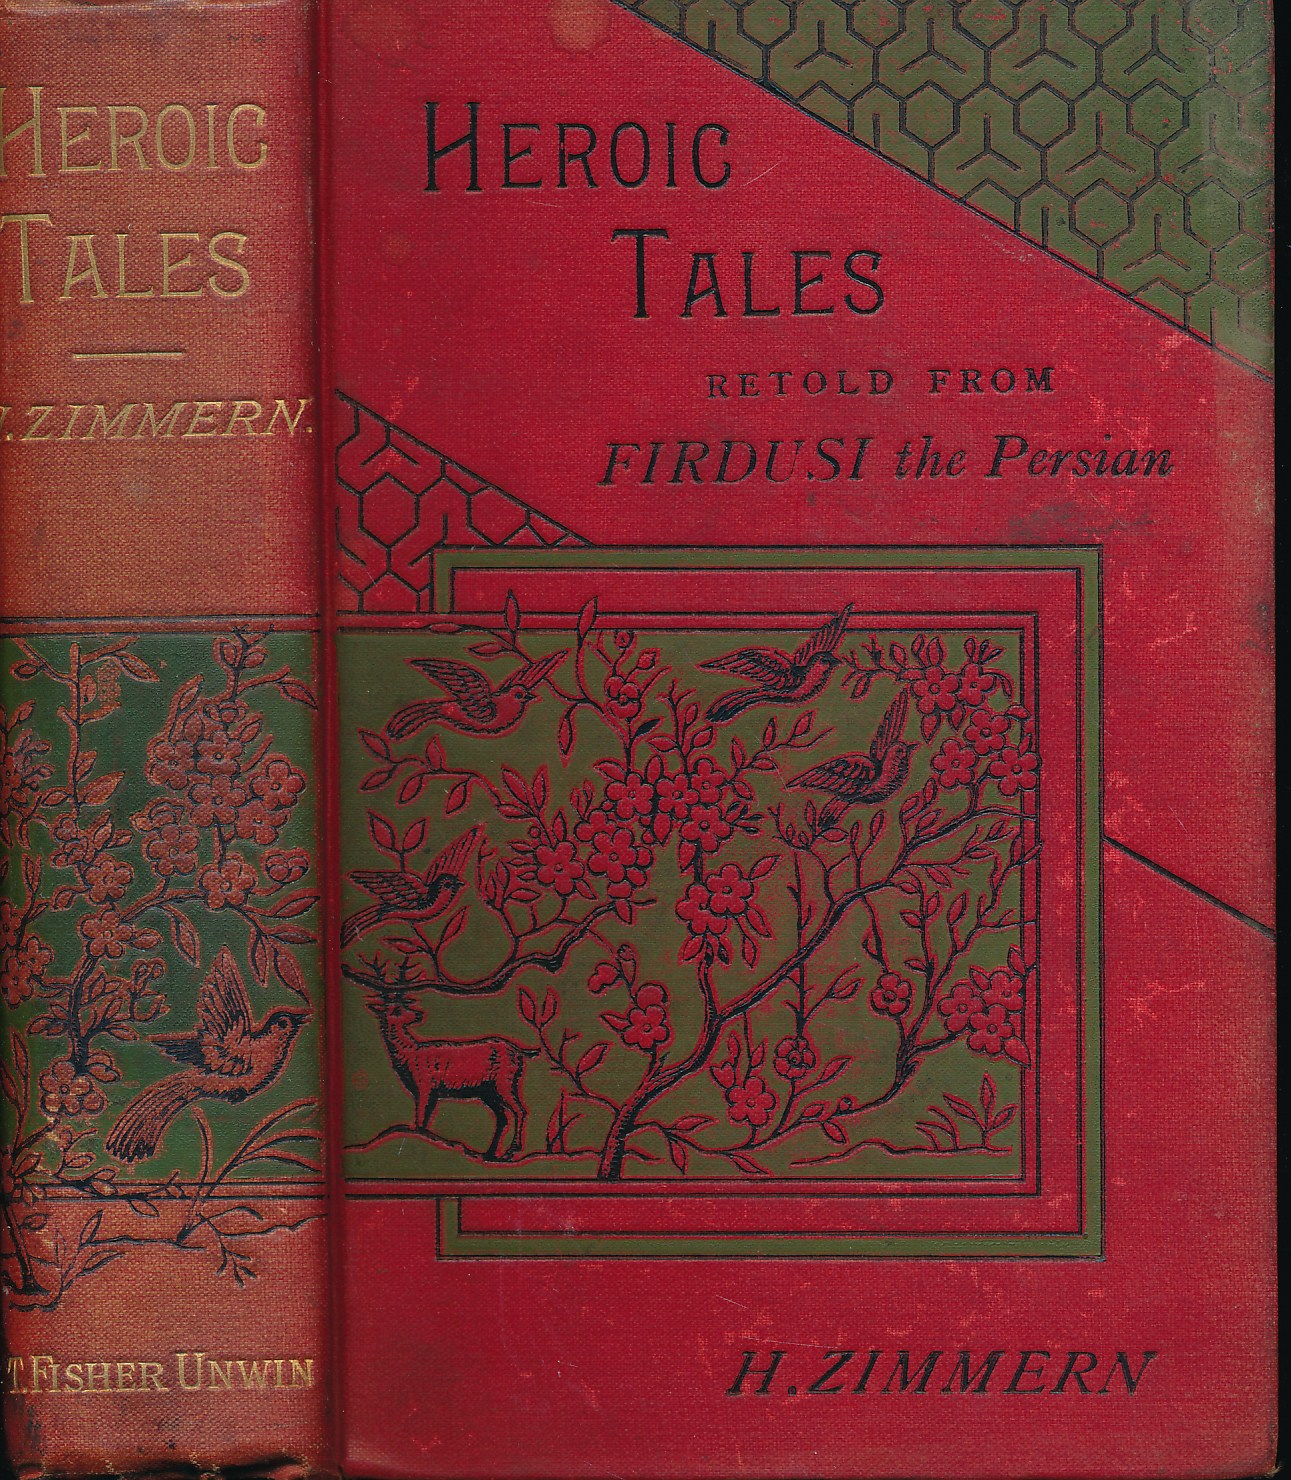 Heroic Tales Retold from Firdusi the Persian